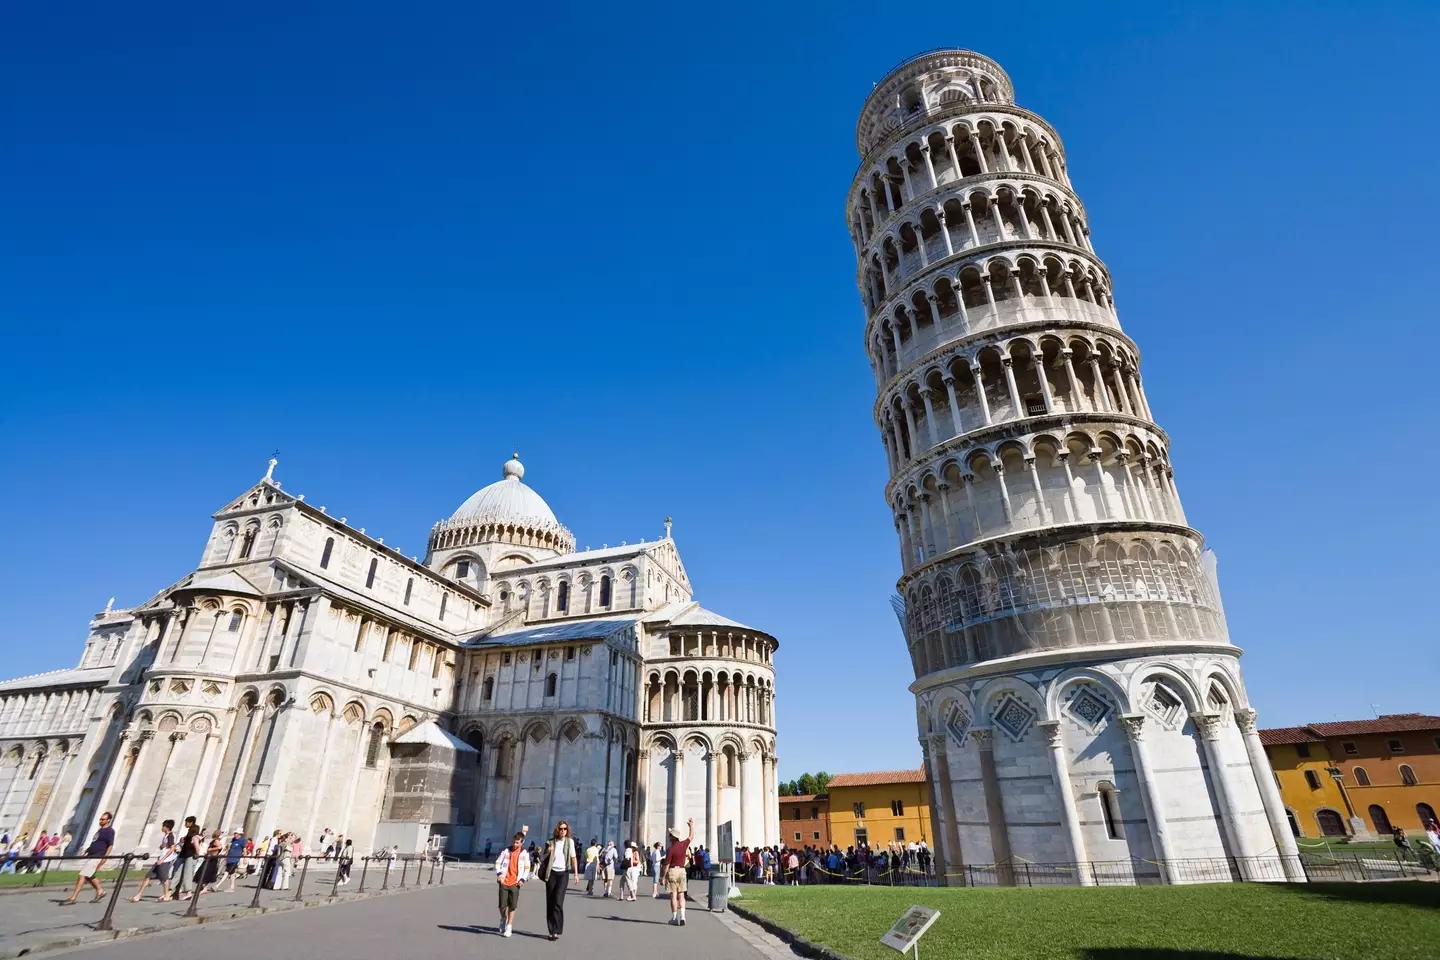 The Leaning Tower of Pisa continues to straighten.